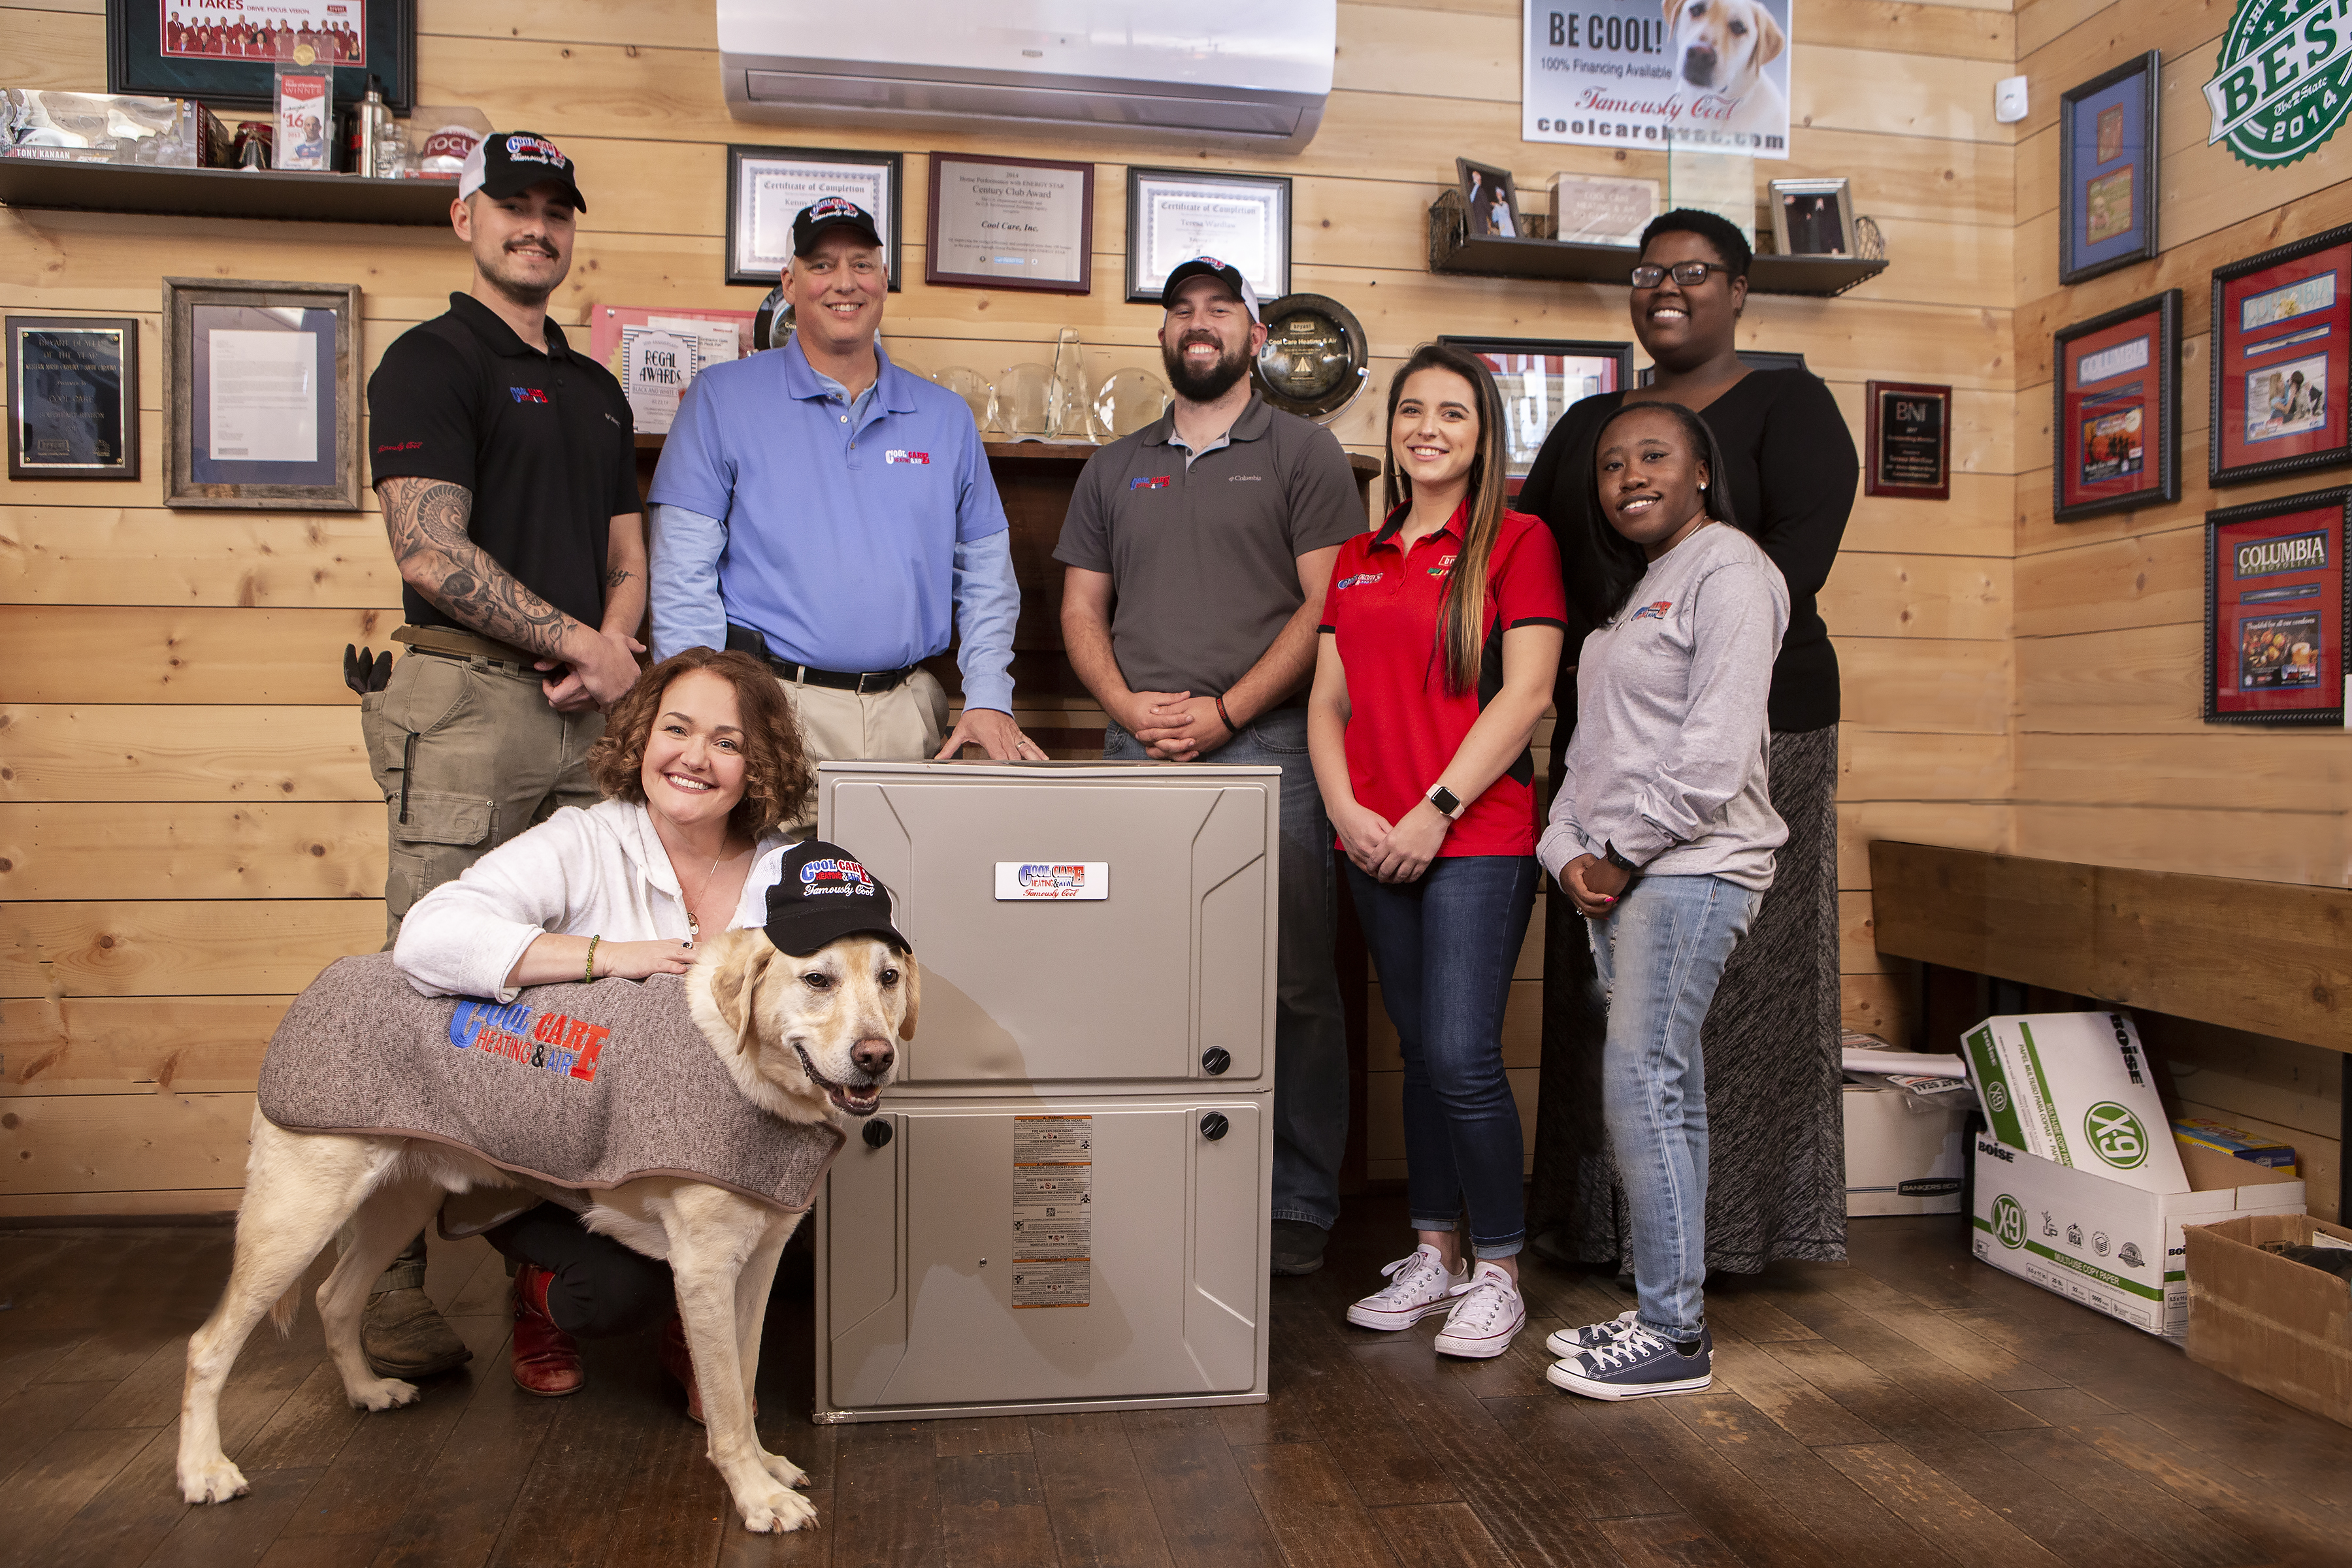 The team at Cool Care Heating & Air gathers around a five-ton gas furnace with their mascot of eight years, Top Dog Ballou Savage, to celebrate Best Heating/Air Service. Teresa Wardlaw with Top Dog Ballou Savage, Josh Savage, Kenny Wardlaw, Andy Potts, Savannah Shrader, Feonnia Johnson, and Kim Maxon.